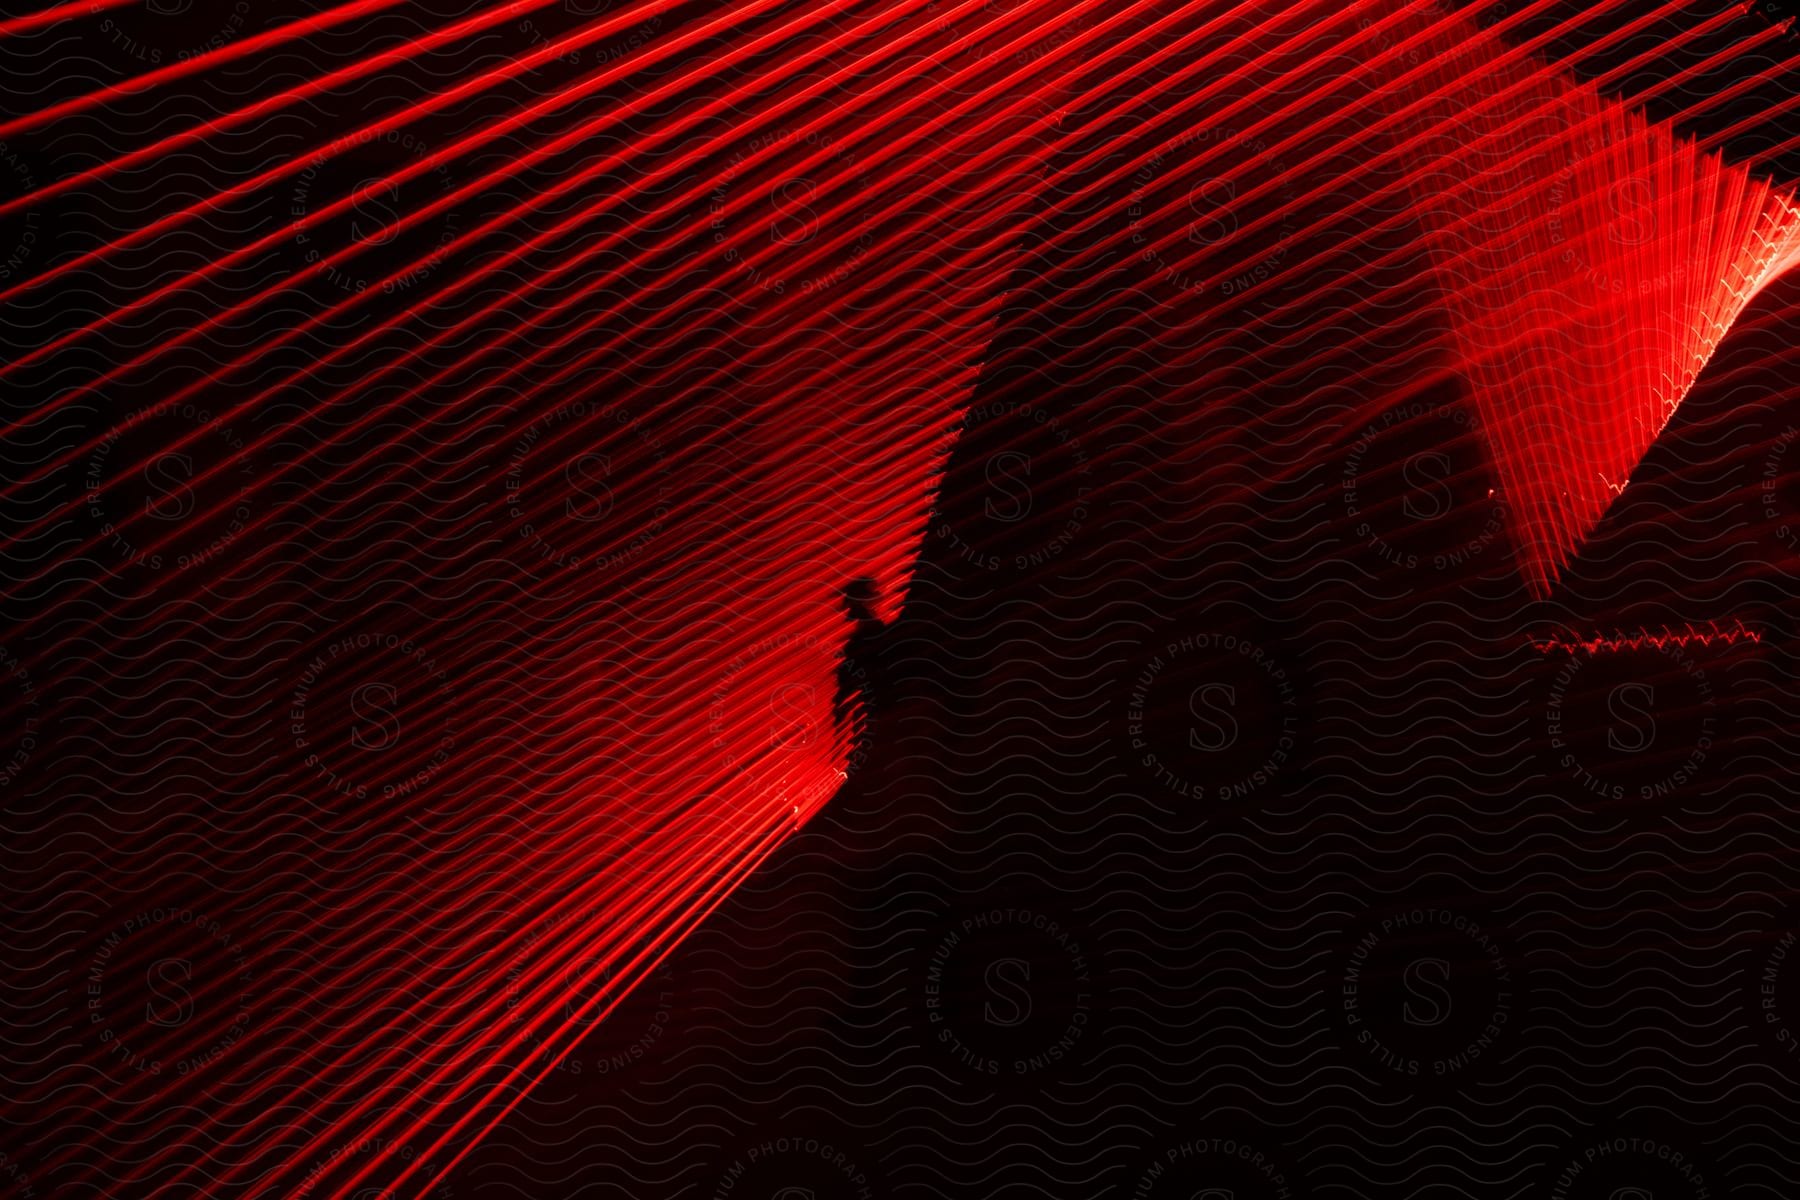 A persons shadow is cast on a diagonal grid of red lights